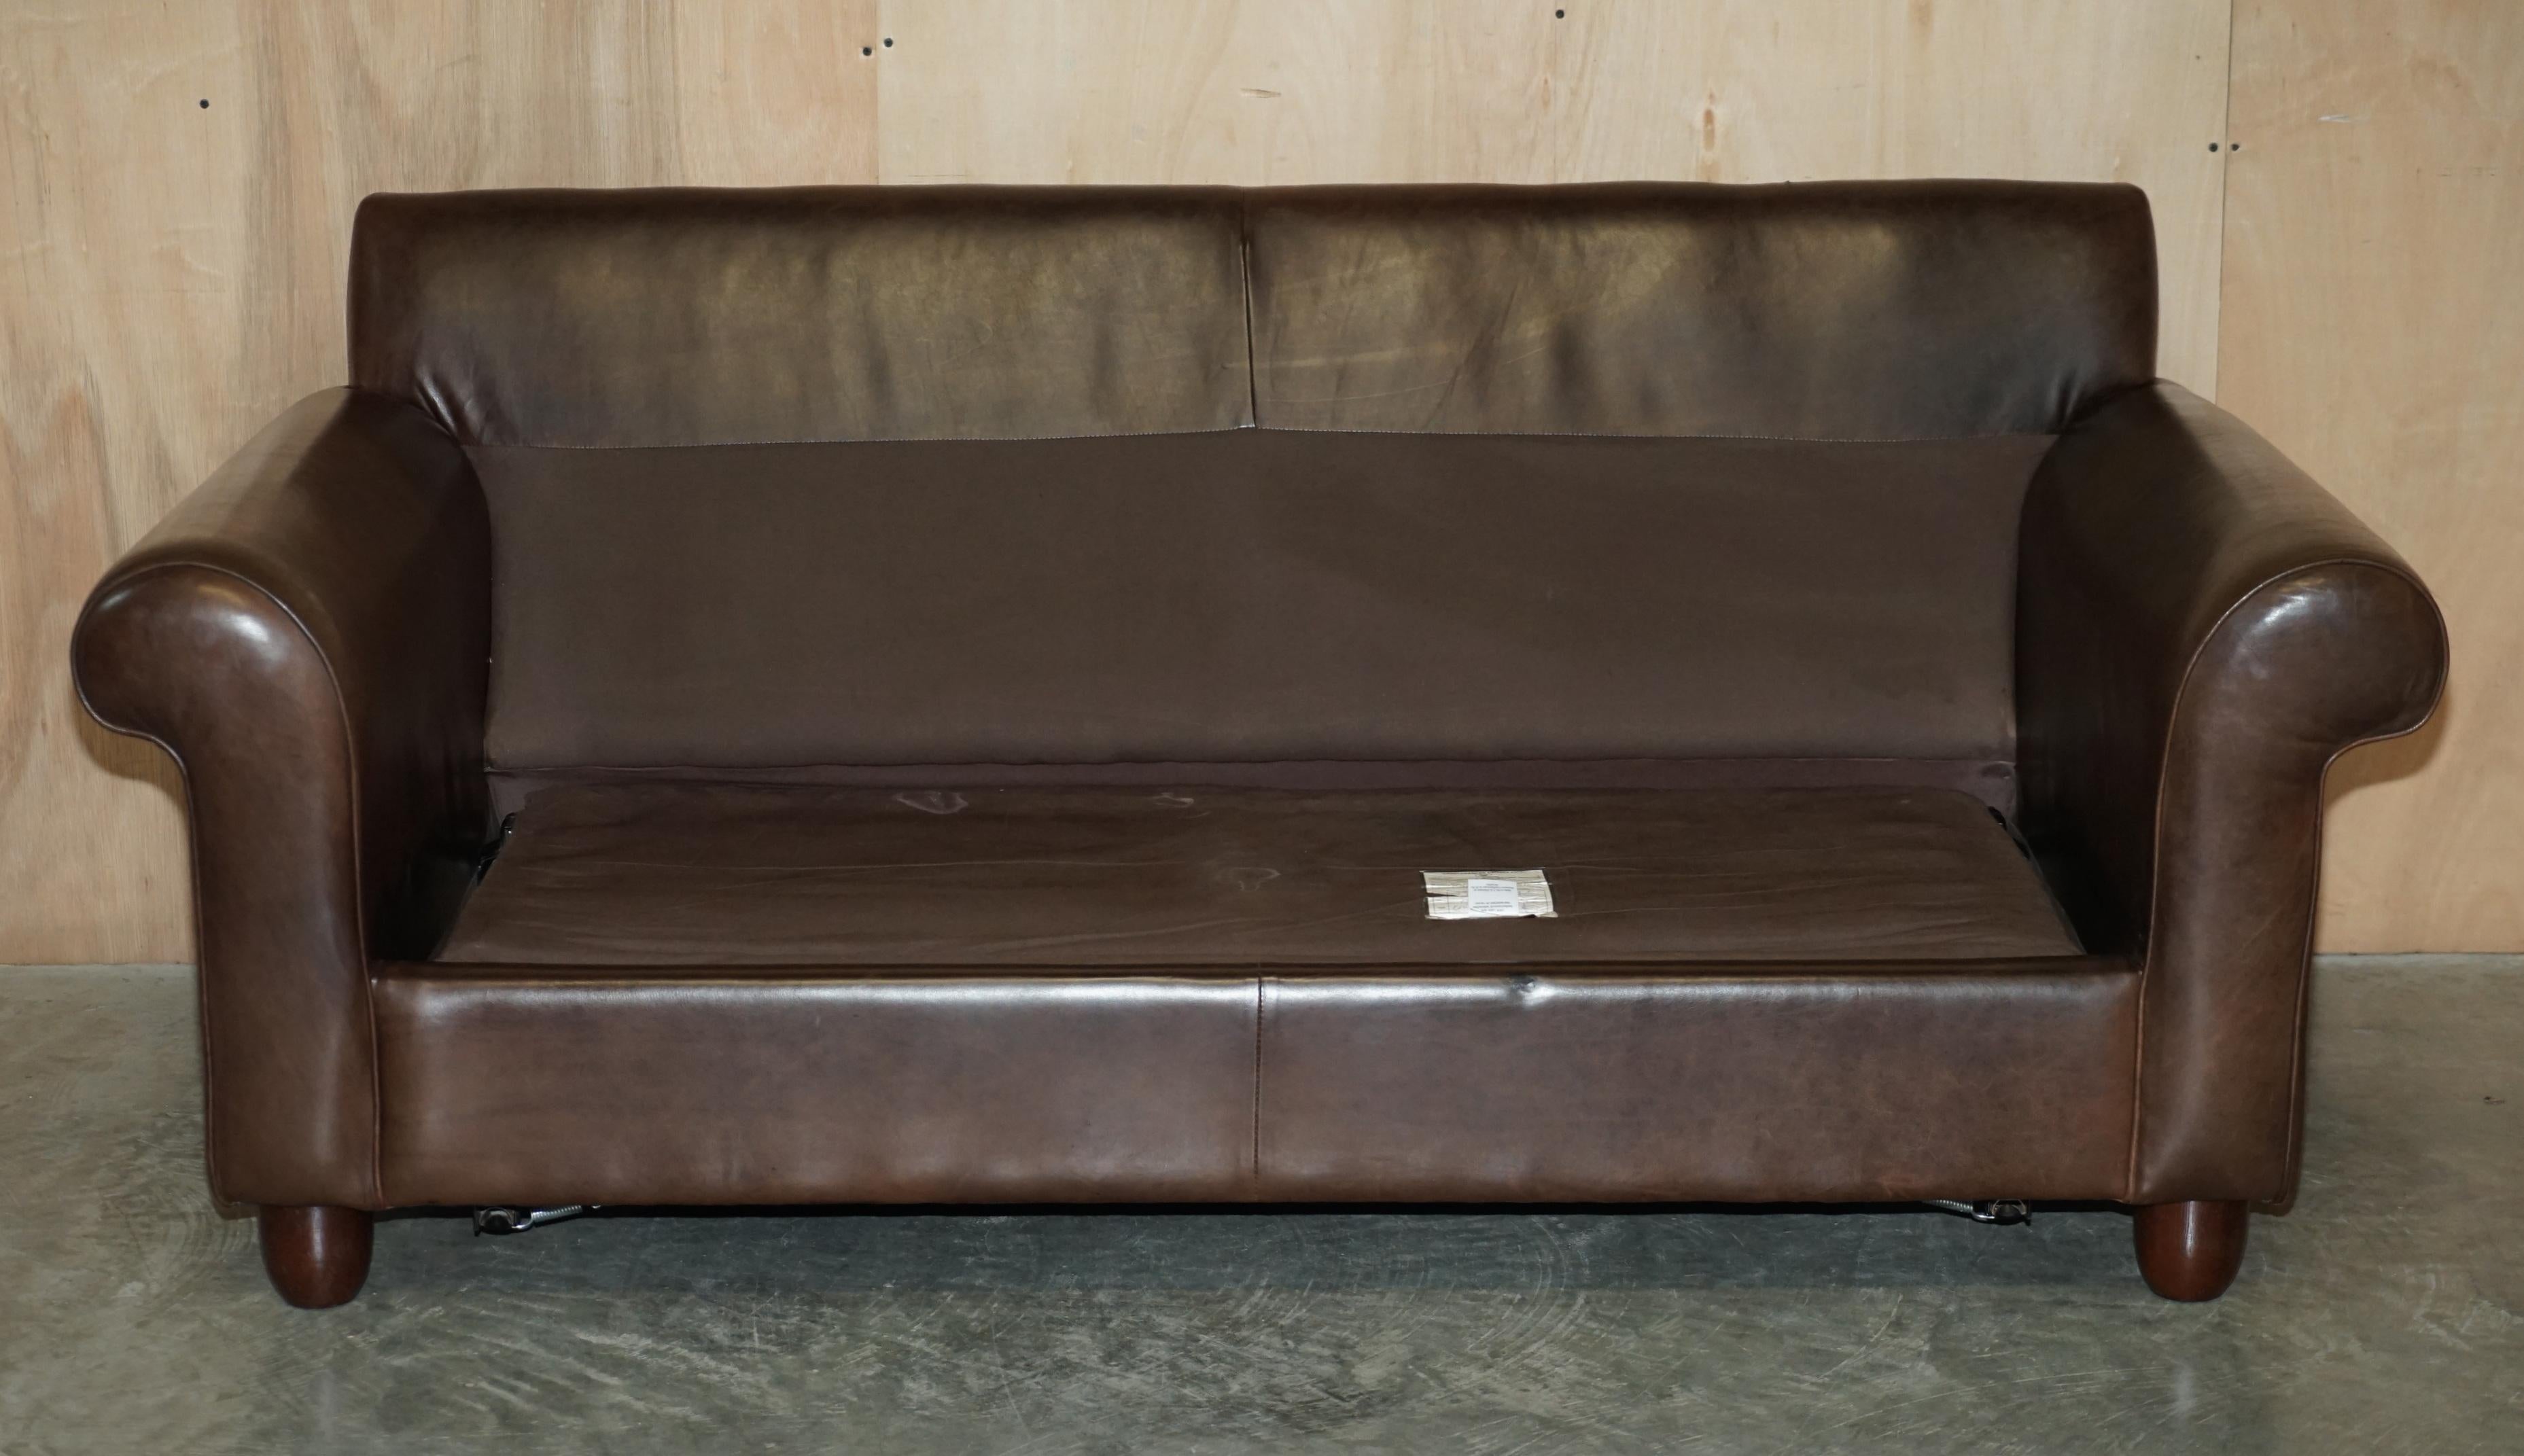 Lovely Heritage Brown Leather Laura Ashley Mortimer Sofabed in Very Nice Order For Sale 5